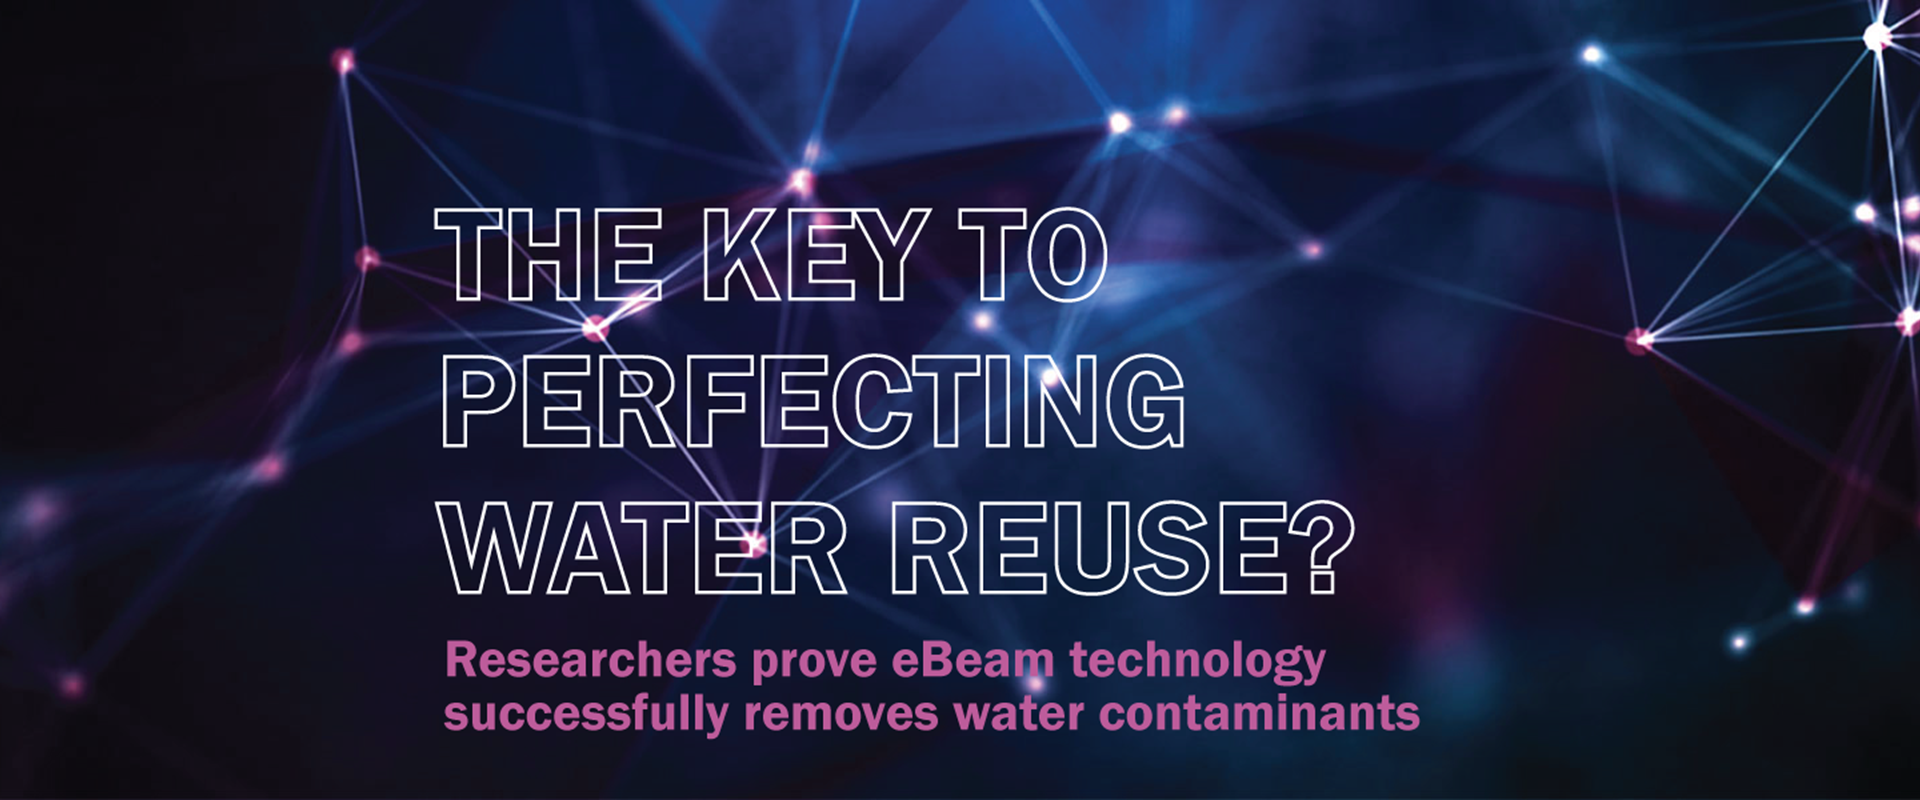 The key to perfecting water reuse?